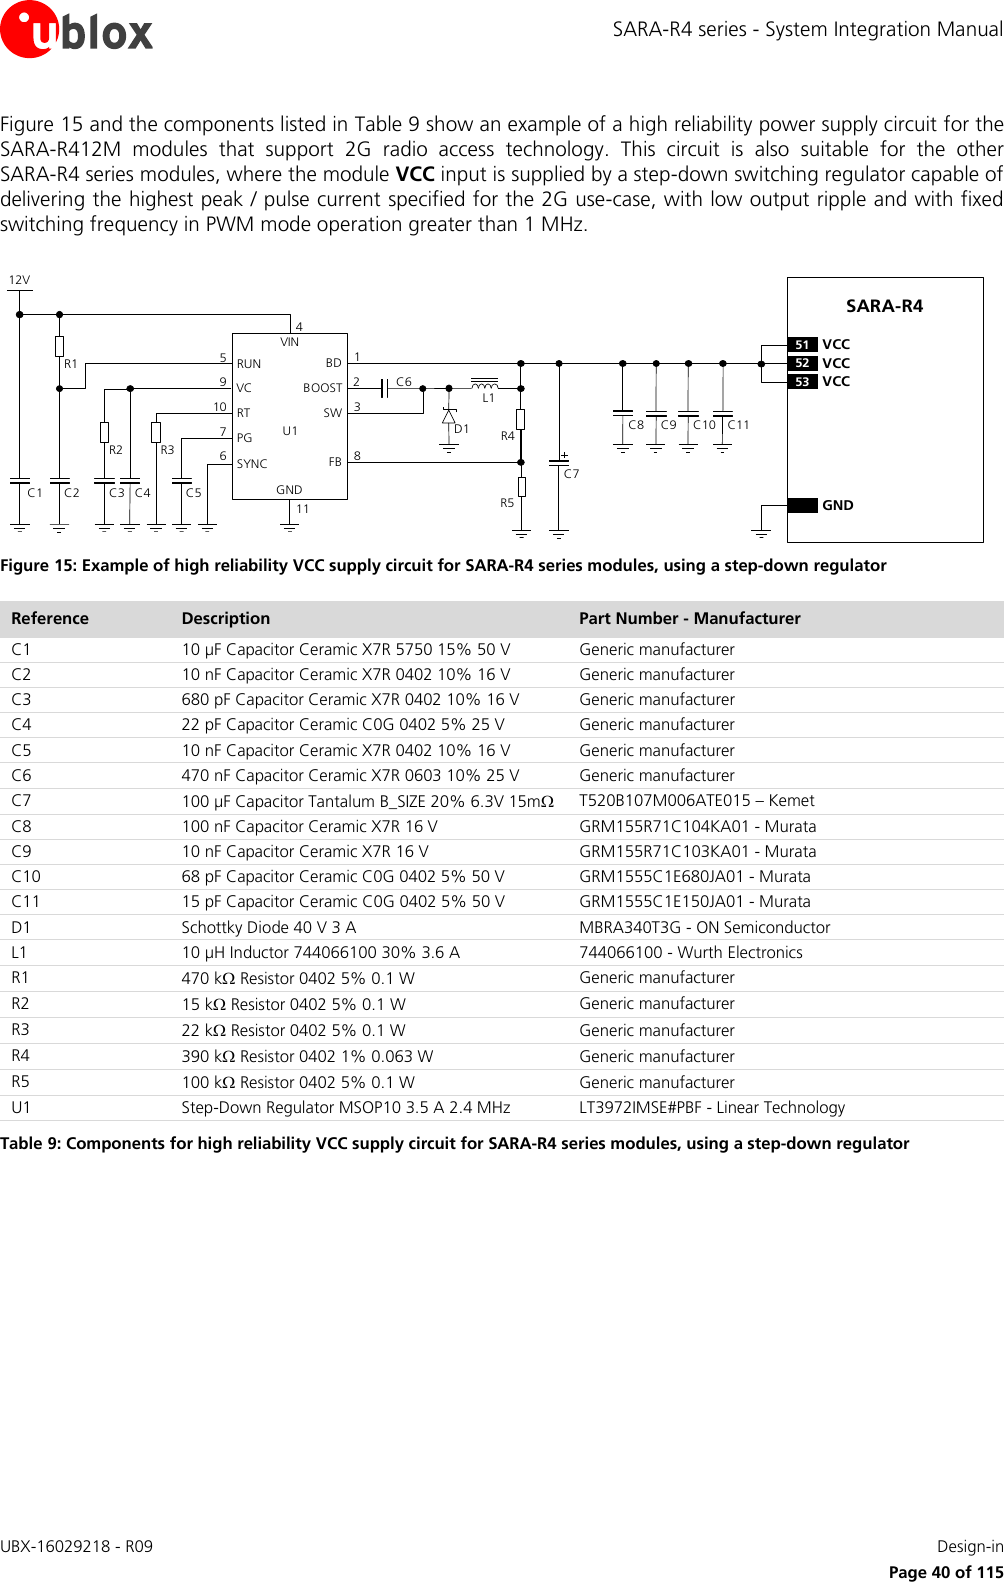 SARA-R4 series - System Integration Manual UBX-16029218 - R09    Design-in     Page 40 of 115 Figure 15 and the components listed in Table 9 show an example of a high reliability power supply circuit for the SARA-R412M  modules  that  support  2G  radio  access  technology.  This  circuit  is  also  suitable  for  the  other  SARA-R4 series modules, where the module VCC input is supplied by a step-down switching regulator capable of delivering the highest peak / pulse current specified for the 2G use-case, with low output ripple and with fixed switching frequency in PWM mode operation greater than 1 MHz.  SARA-R412VC5R3C4R2C2C1R1VINRUNVCRTPGSYNCBDBOOSTSWFBGND671095C61238114C7C8D1 R4R5L1C3U152 VCC53 VCC51 VCCGNDC9 C10 C11 Figure 15: Example of high reliability VCC supply circuit for SARA-R4 series modules, using a step-down regulator Reference Description Part Number - Manufacturer C1 10 µF Capacitor Ceramic X7R 5750 15% 50 V Generic manufacturer C2 10 nF Capacitor Ceramic X7R 0402 10% 16 V Generic manufacturer C3 680 pF Capacitor Ceramic X7R 0402 10% 16 V Generic manufacturer C4 22 pF Capacitor Ceramic C0G 0402 5% 25 V Generic manufacturer C5 10 nF Capacitor Ceramic X7R 0402 10% 16 V Generic manufacturer C6 470 nF Capacitor Ceramic X7R 0603 10% 25 V Generic manufacturer C7 100 µF Capacitor Tantalum B_SIZE 20% 6.3V 15m T520B107M006ATE015 – Kemet C8 100 nF Capacitor Ceramic X7R 16 V GRM155R71C104KA01 - Murata C9 10 nF Capacitor Ceramic X7R 16 V GRM155R71C103KA01 - Murata C10 68 pF Capacitor Ceramic C0G 0402 5% 50 V GRM1555C1E680JA01 - Murata C11 15 pF Capacitor Ceramic C0G 0402 5% 50 V GRM1555C1E150JA01 - Murata D1 Schottky Diode 40 V 3 A MBRA340T3G - ON Semiconductor L1 10 µH Inductor 744066100 30% 3.6 A 744066100 - Wurth Electronics R1 470 k Resistor 0402 5% 0.1 W Generic manufacturer R2 15 k Resistor 0402 5% 0.1 W Generic manufacturer R3 22 k Resistor 0402 5% 0.1 W Generic manufacturer R4 390 k Resistor 0402 1% 0.063 W Generic manufacturer R5 100 k Resistor 0402 5% 0.1 W Generic manufacturer U1 Step-Down Regulator MSOP10 3.5 A 2.4 MHz LT3972IMSE#PBF - Linear Technology Table 9: Components for high reliability VCC supply circuit for SARA-R4 series modules, using a step-down regulator  